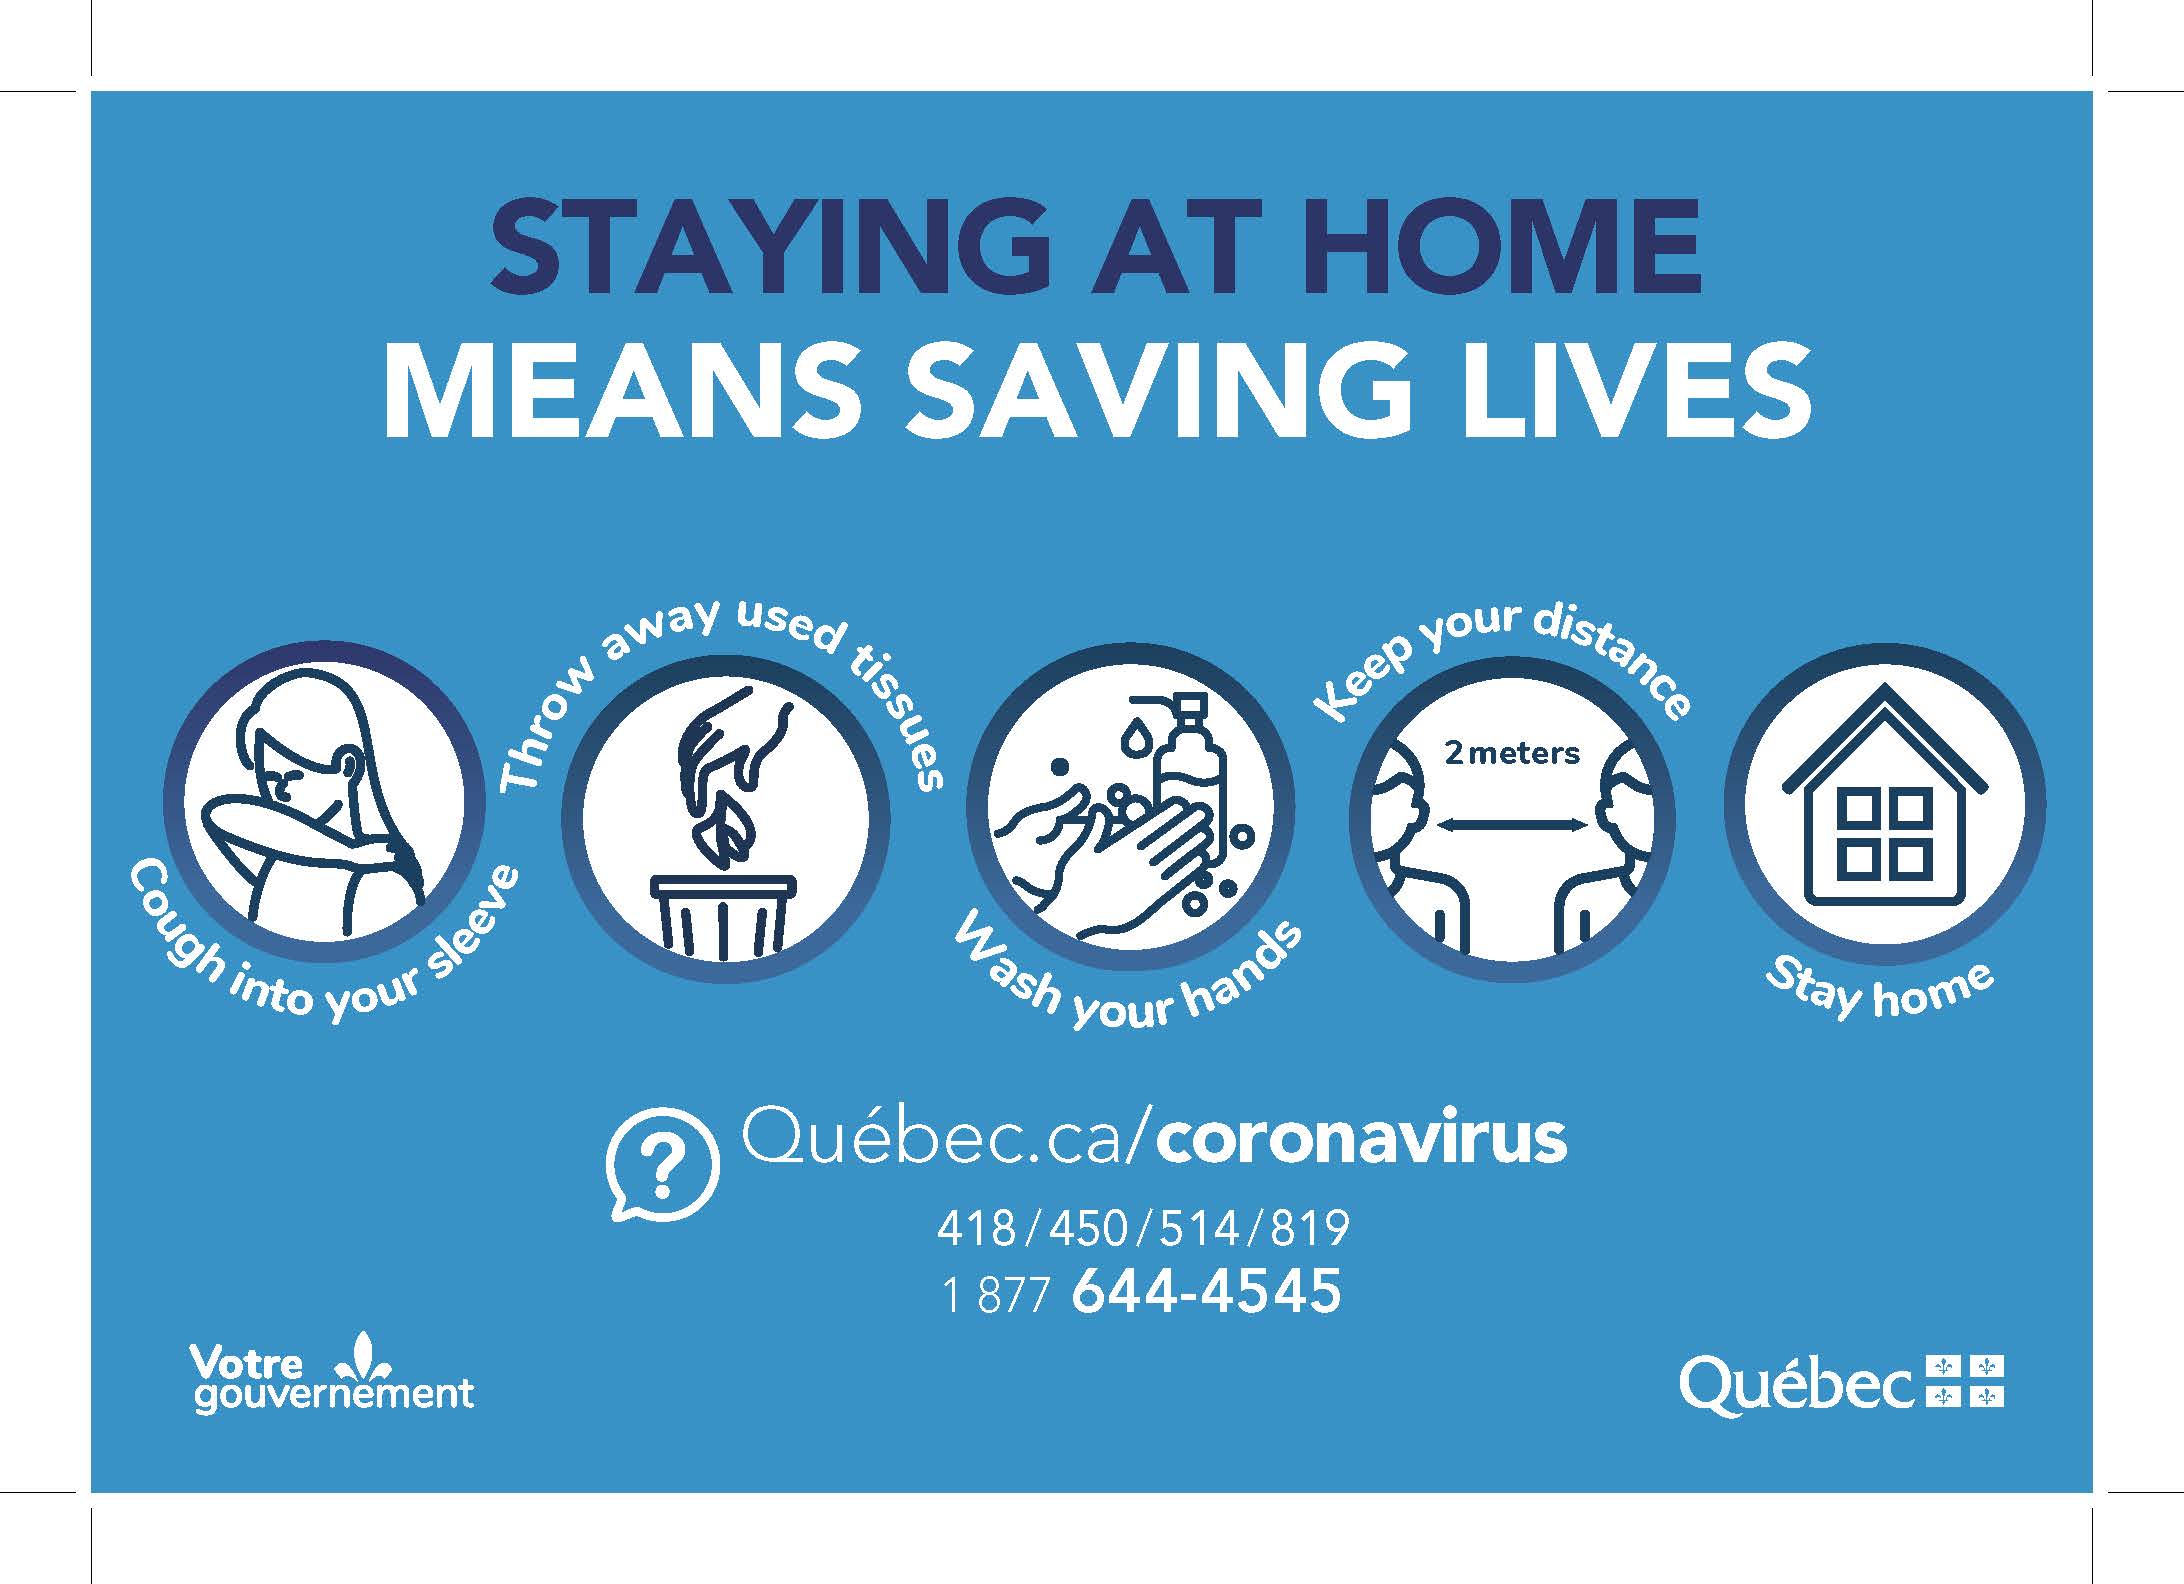 We save lives. Conserve meaning. Life saving Rules.